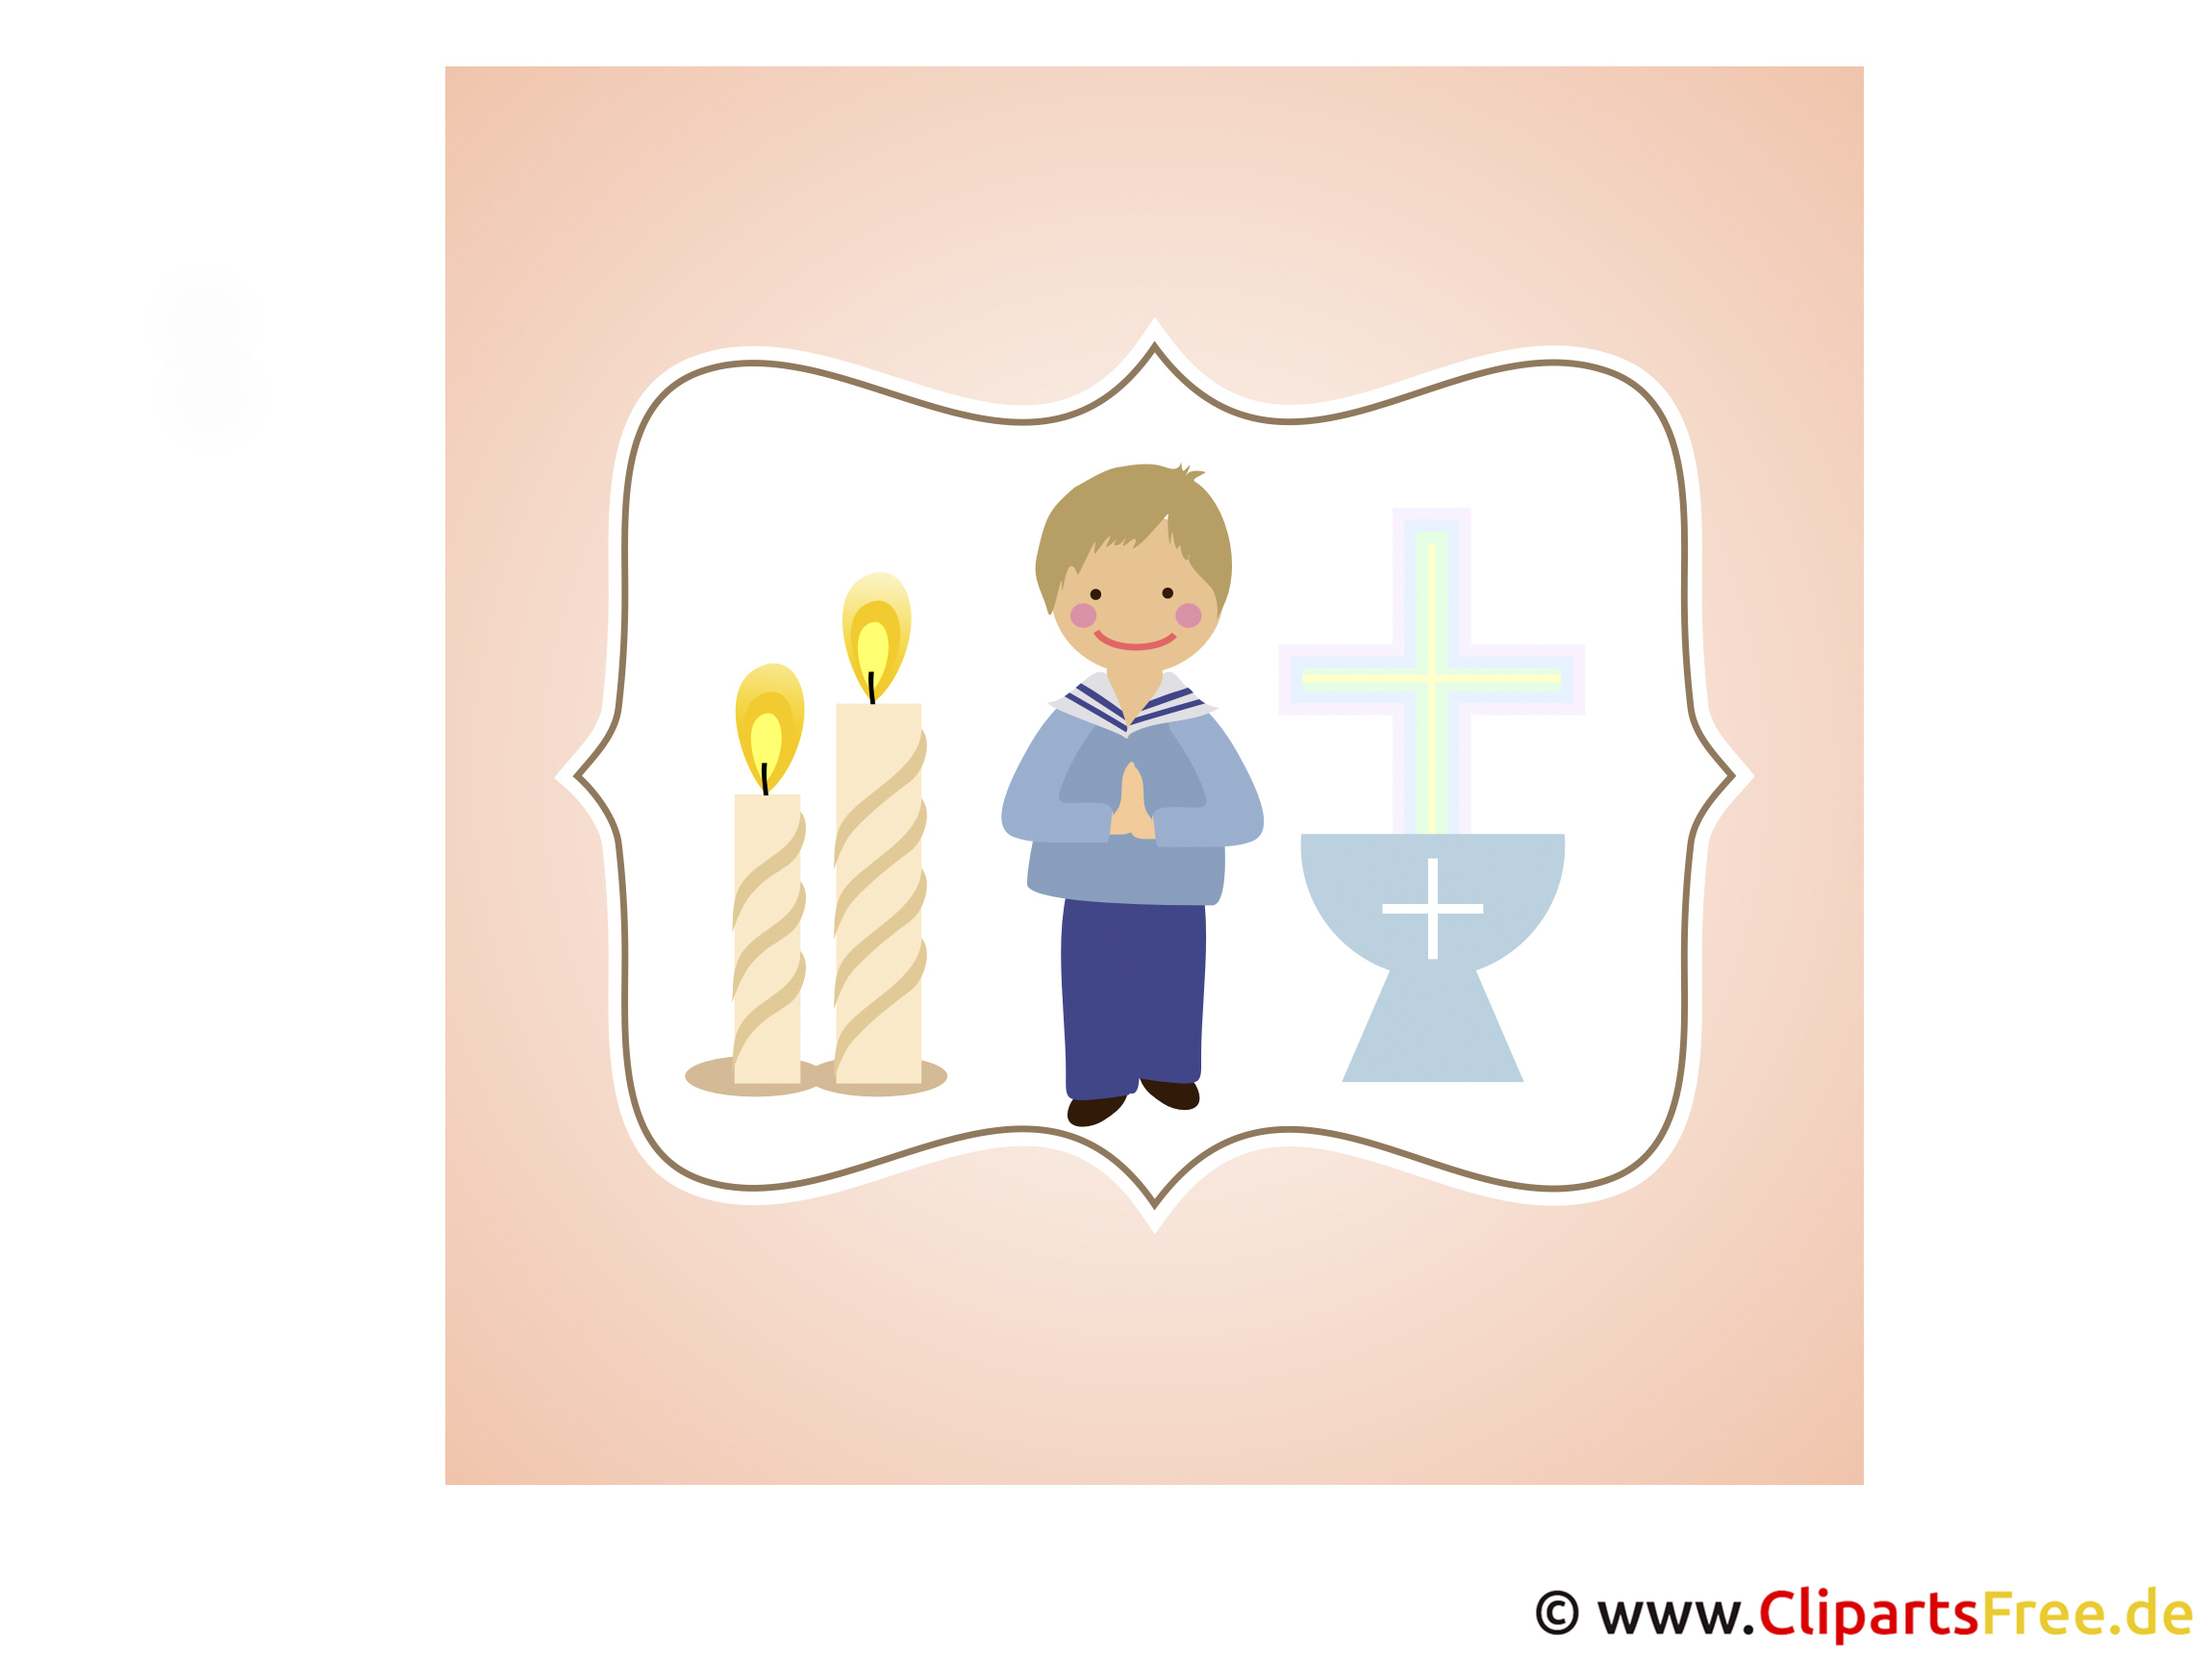 Images Confirmation, free images collection, illustration, free clipart, cl...